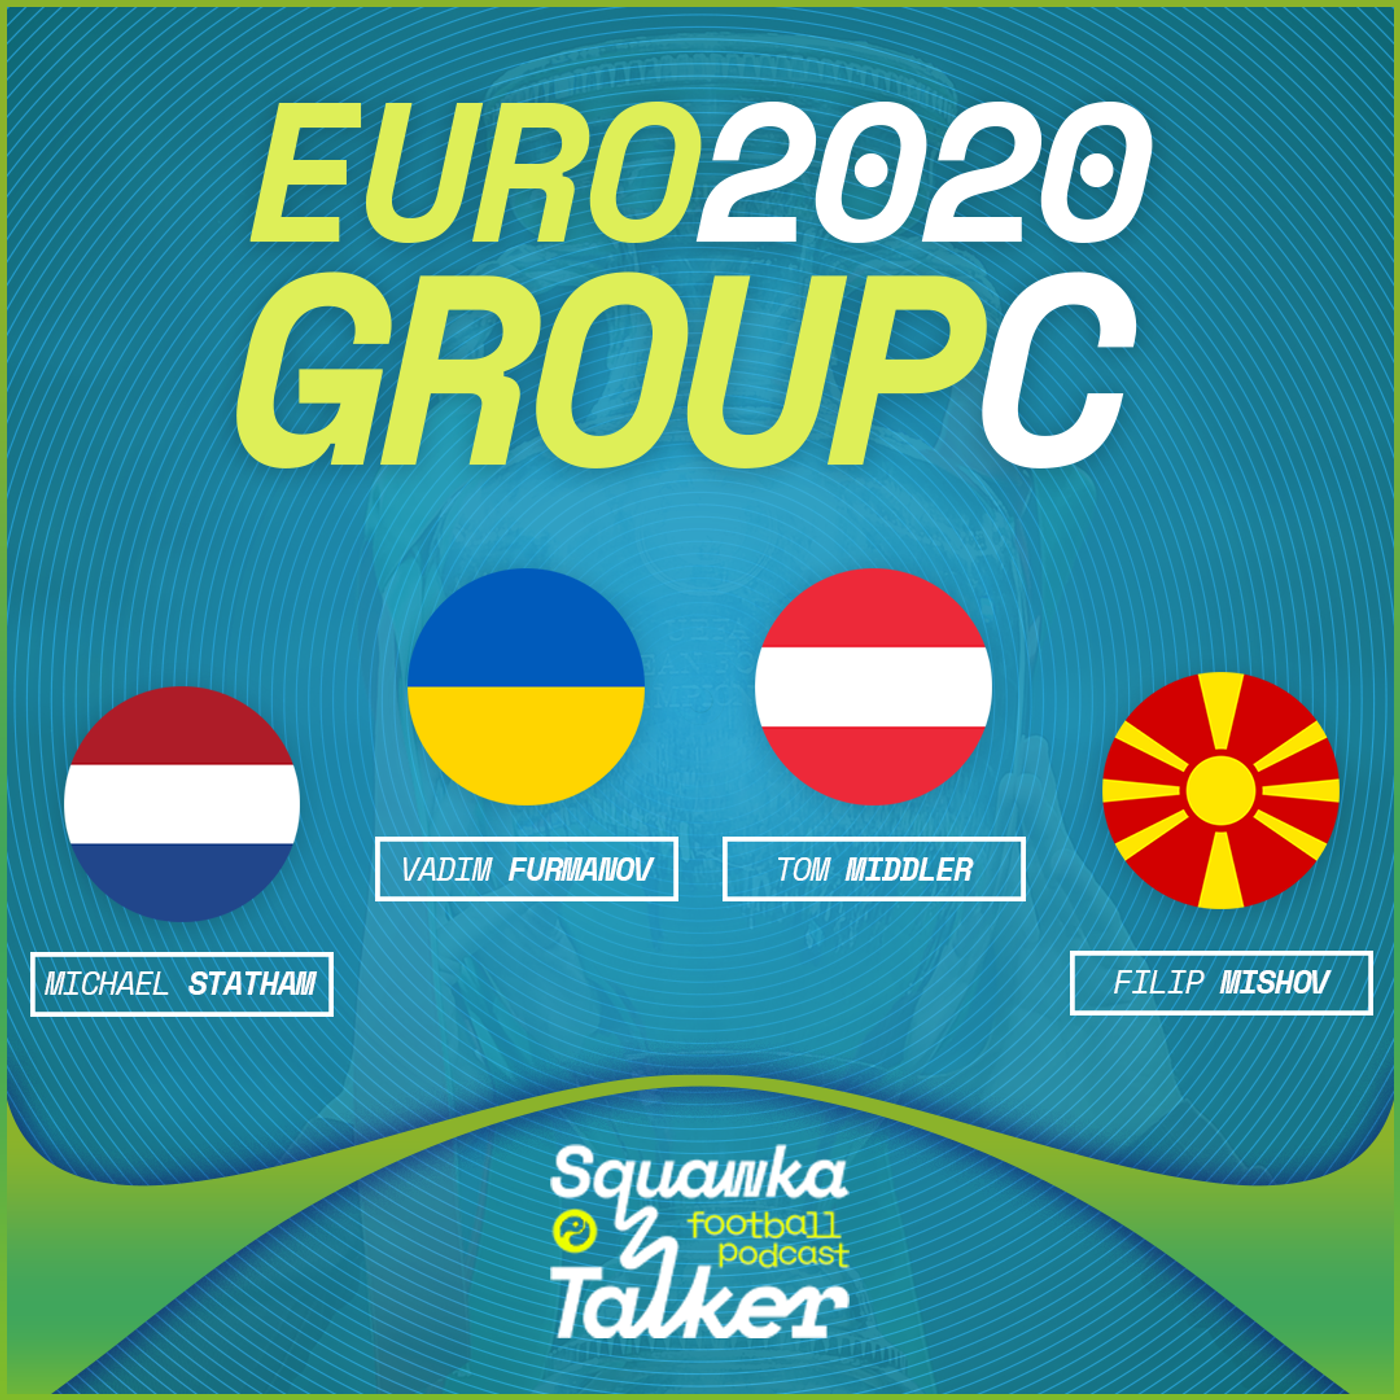 EURO 2020: Your complete guide to Group C